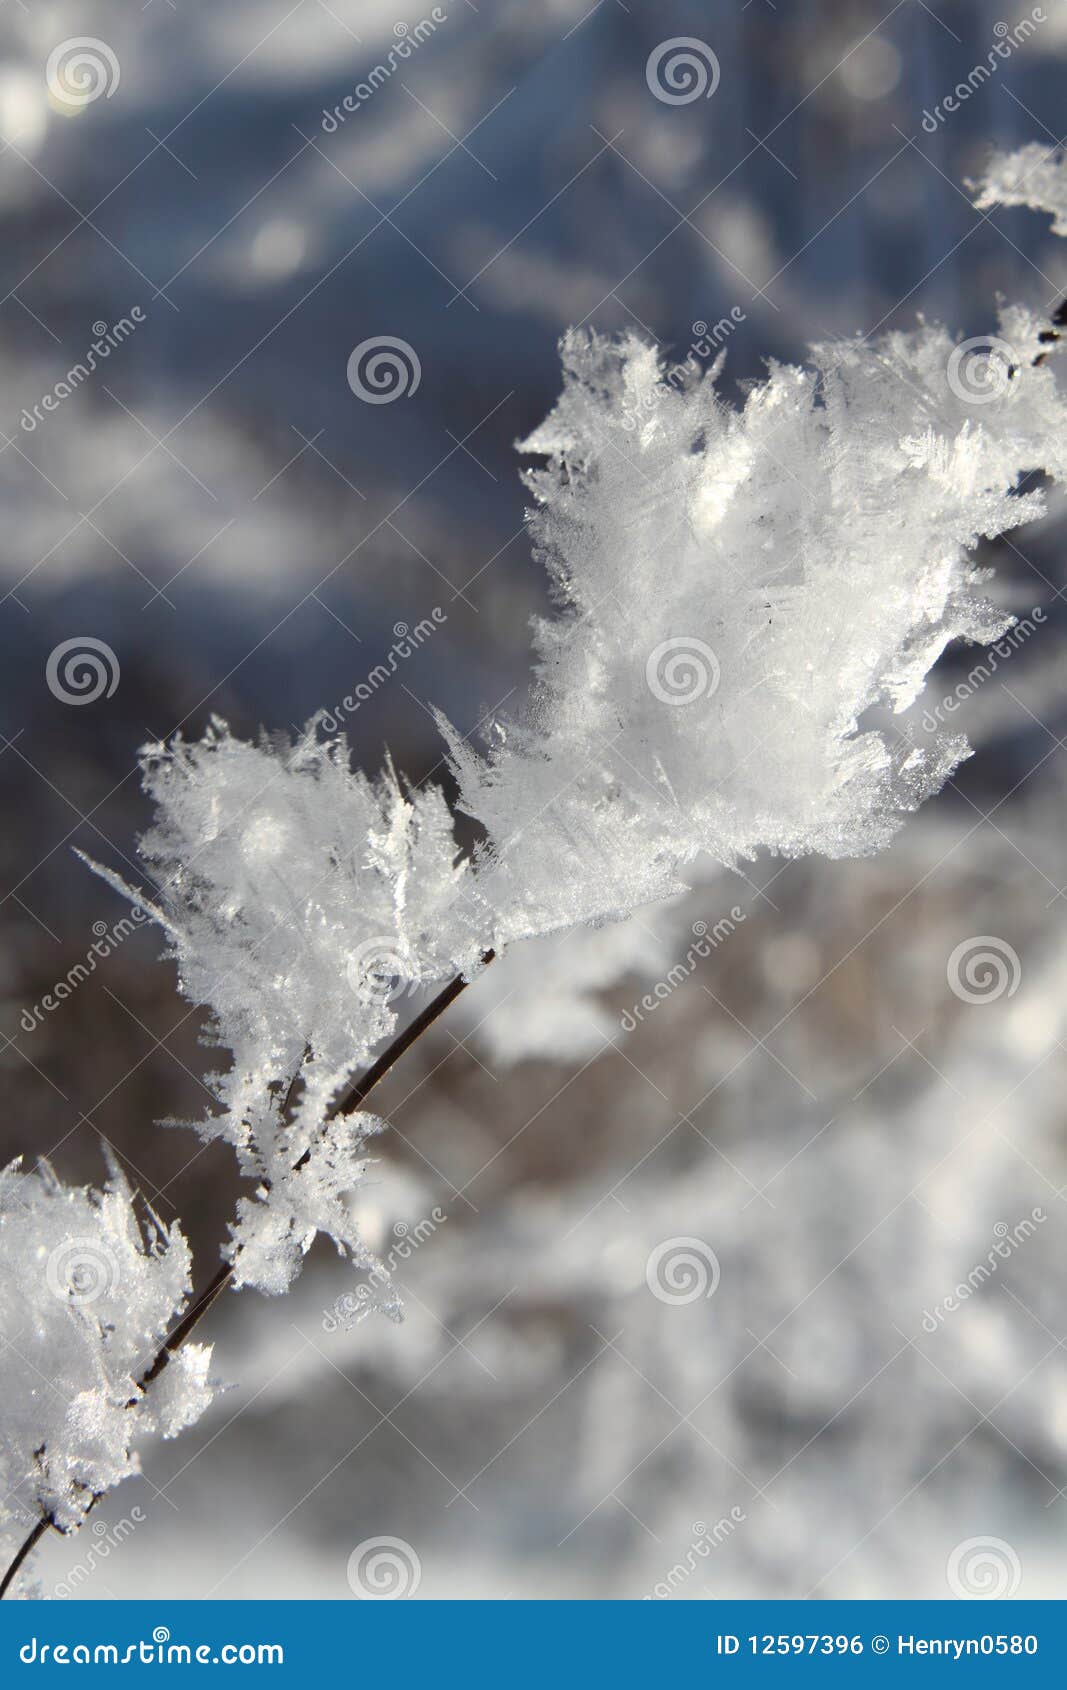 Snow Crystals Royalty Free Stock Image - Image: 12597396